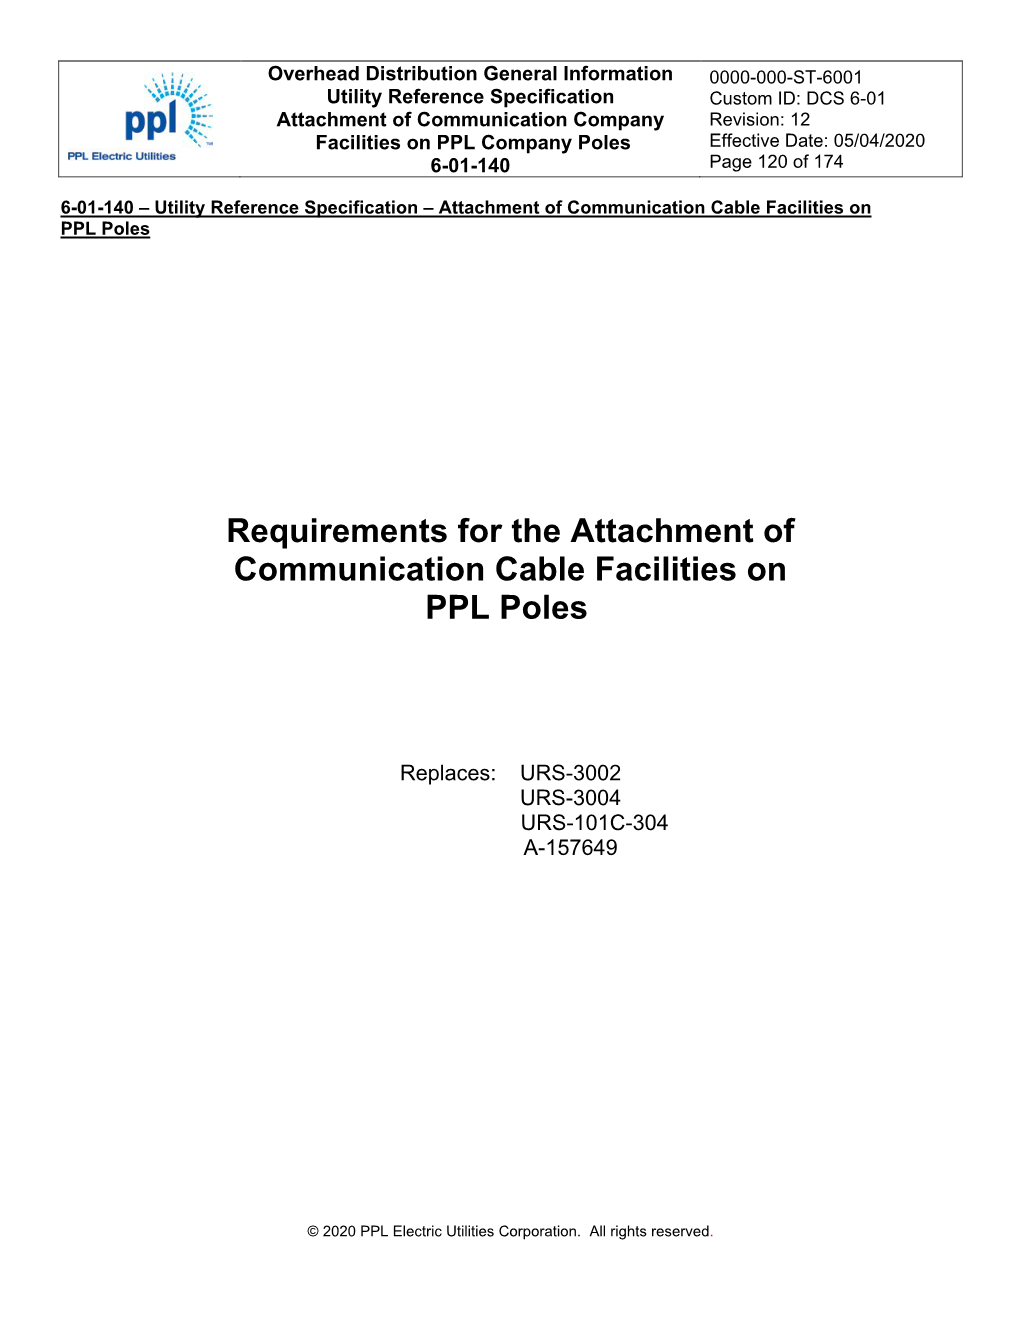 Requirements for the Attachment of Communication Cable Facilities on PPL Poles